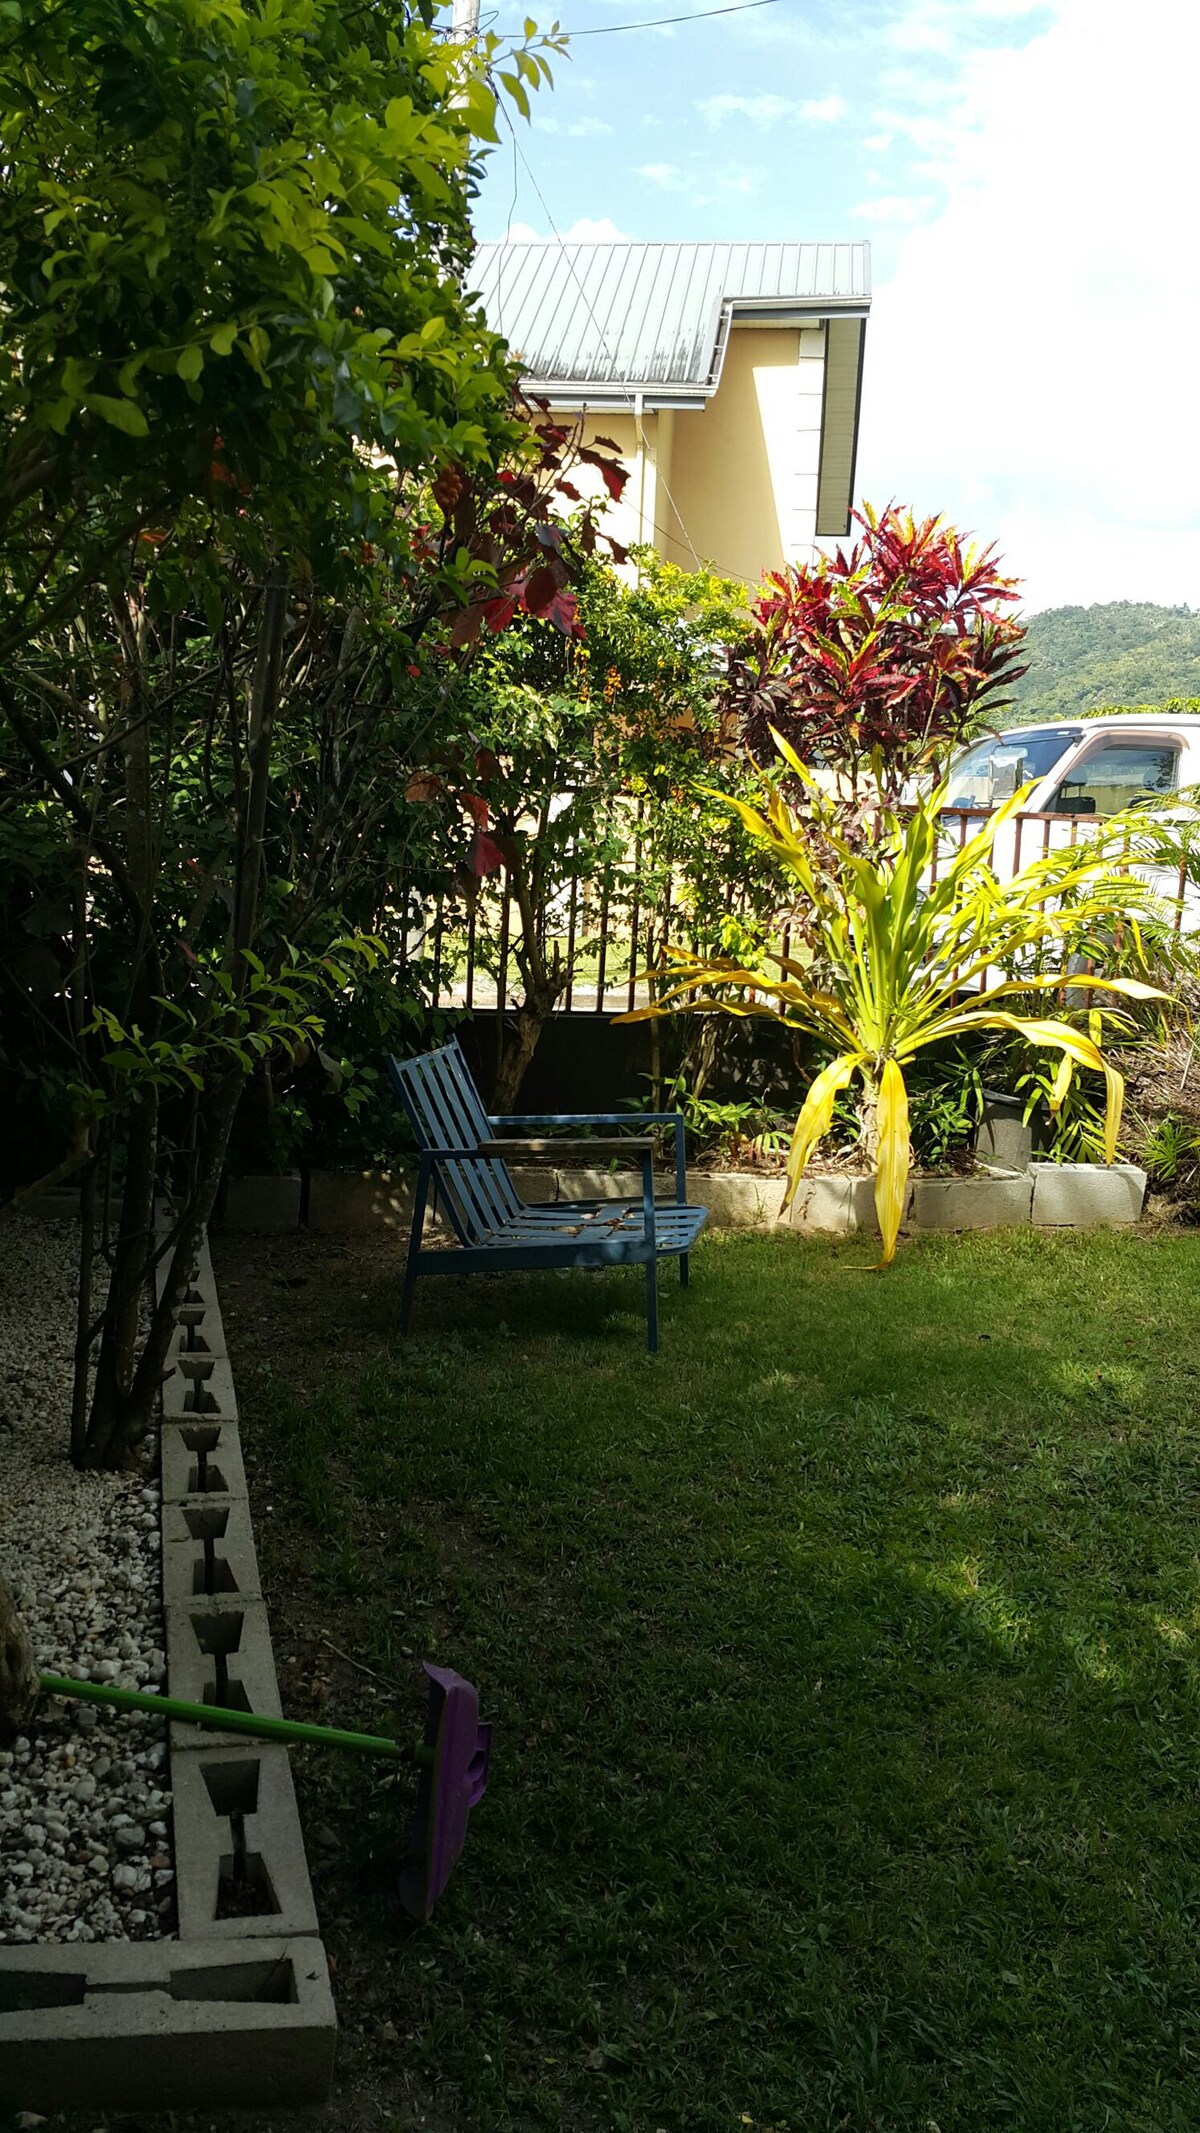 Tonys Guesthouse in sunny Trinidad